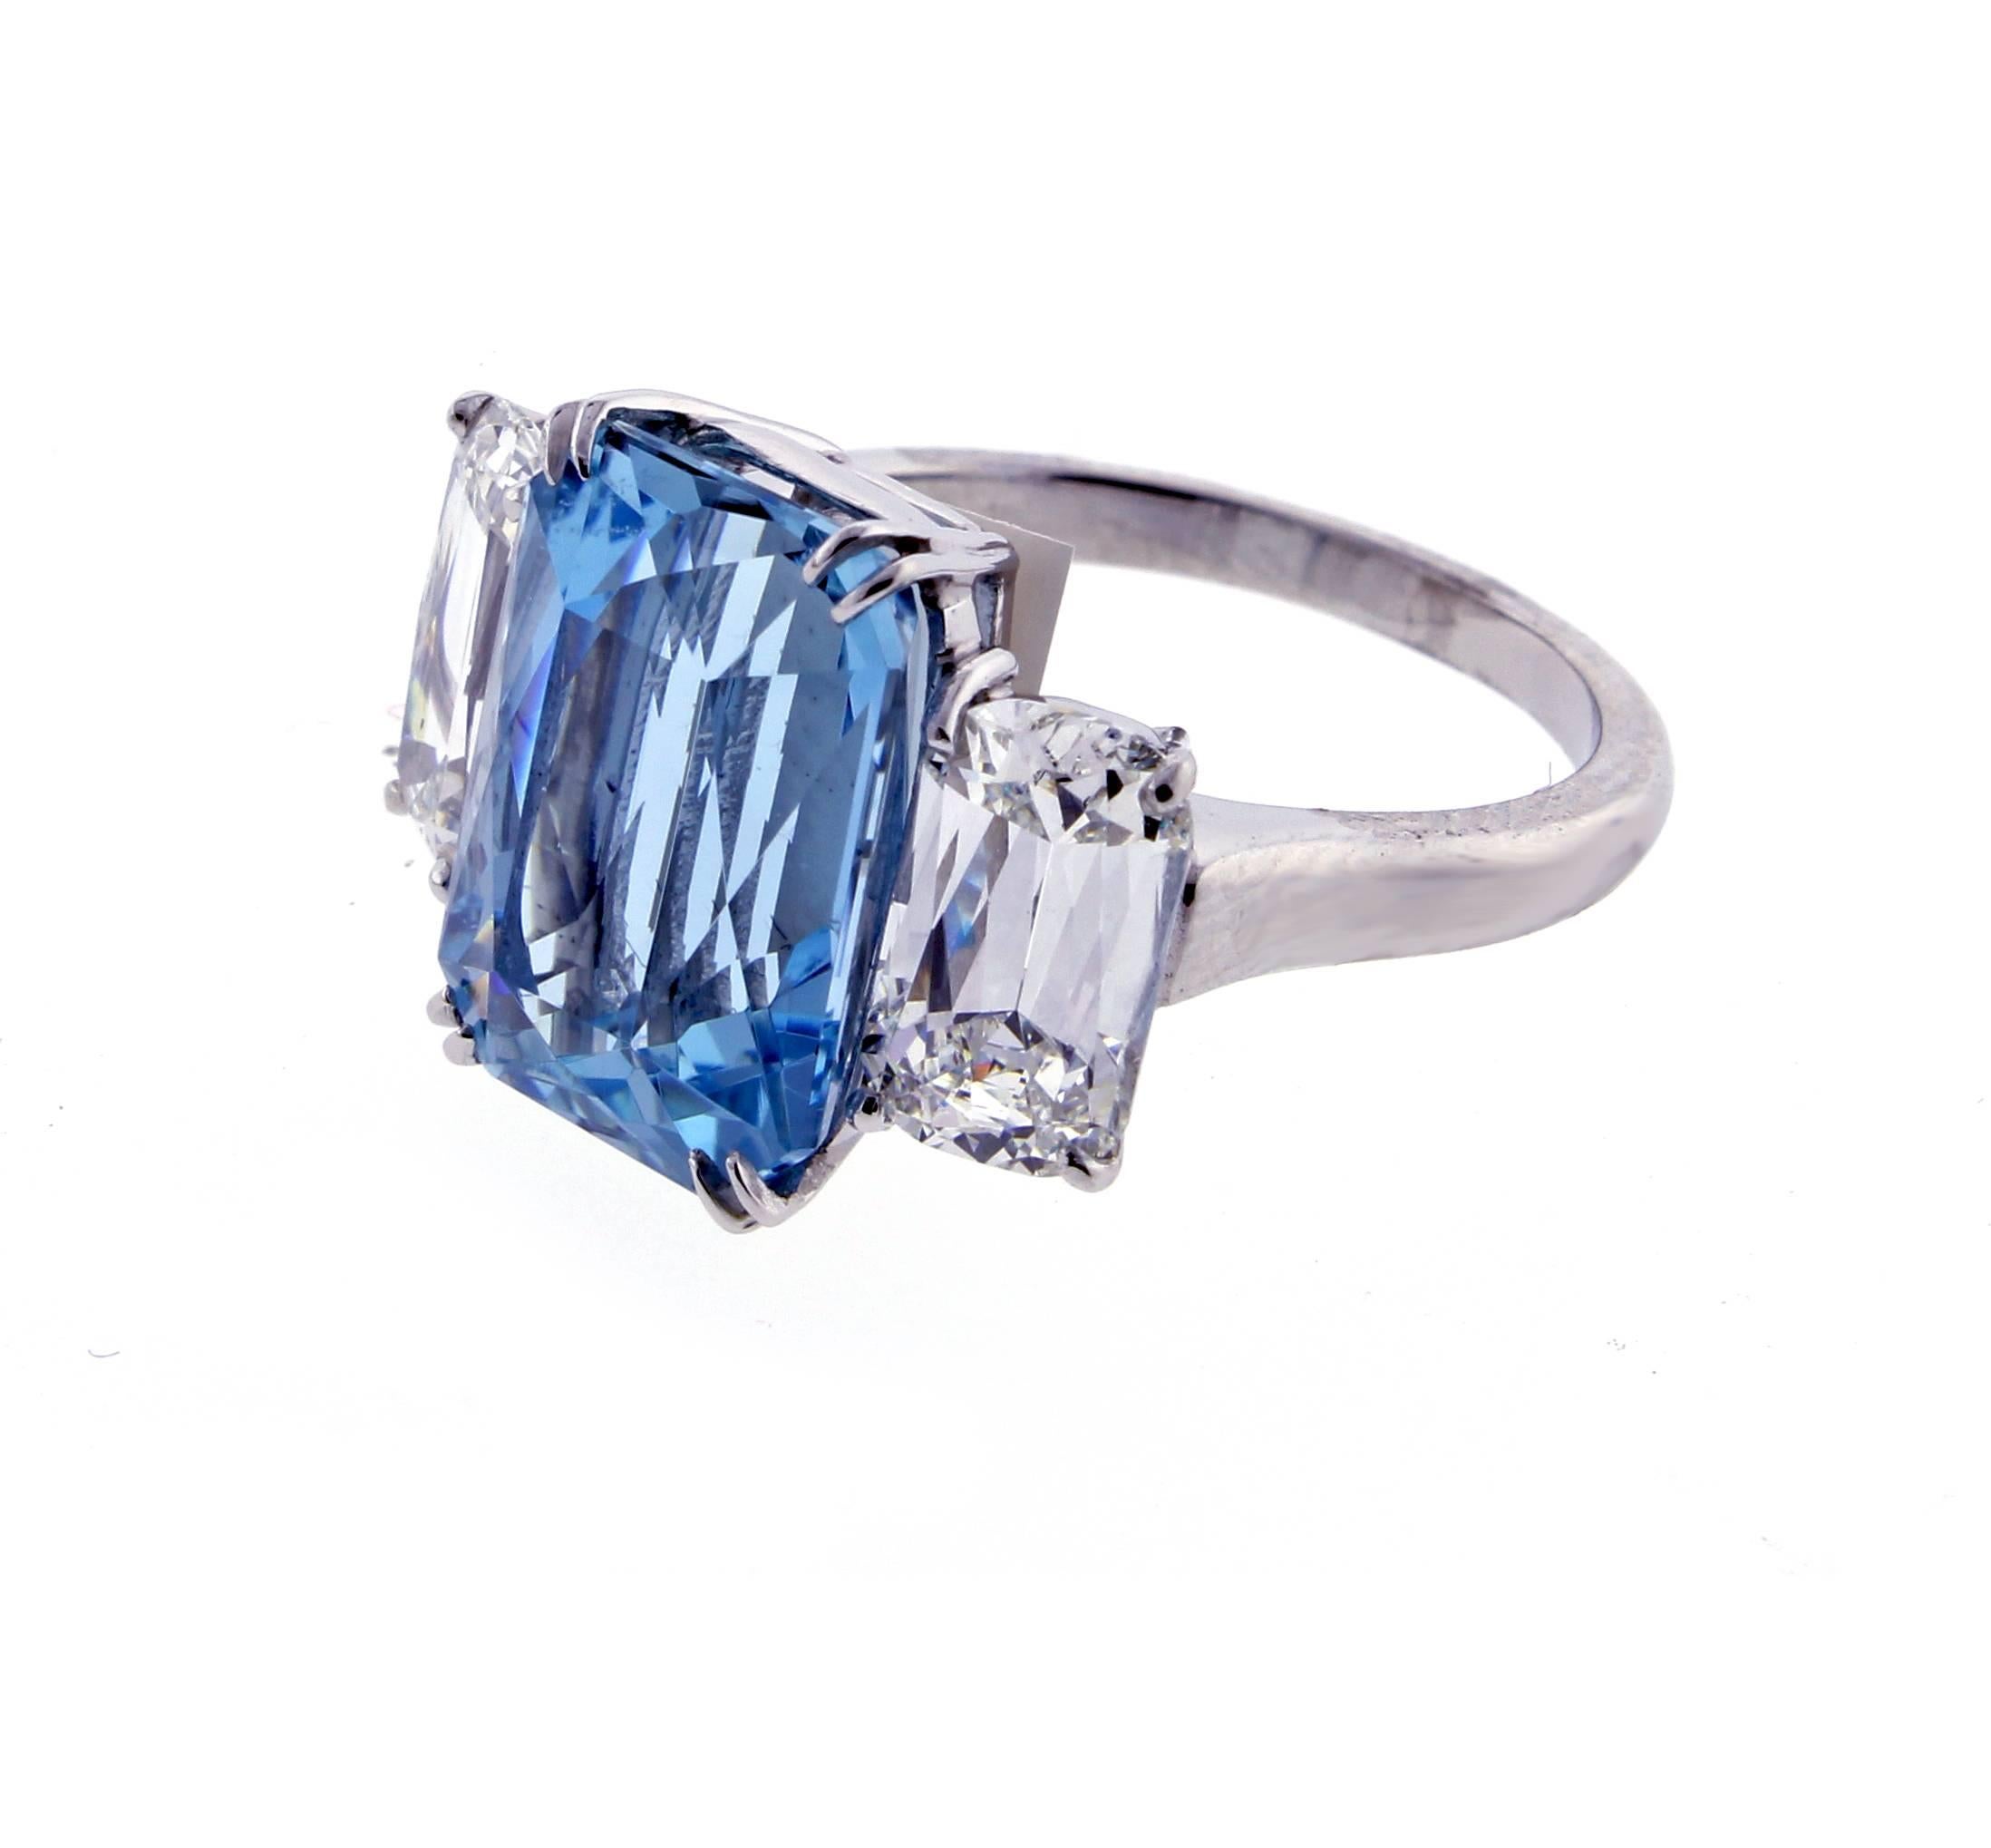 A Santa Maria aquamarine is paired with two of Ashoka cut diamonds creating a ring of unparalleled beauty.   The aquamarine weighs 6.85 carats. The two Ashoka G.I .A. certified diamonds weigh 1.38 and 1.44 carats and are H color and VS2, SI1